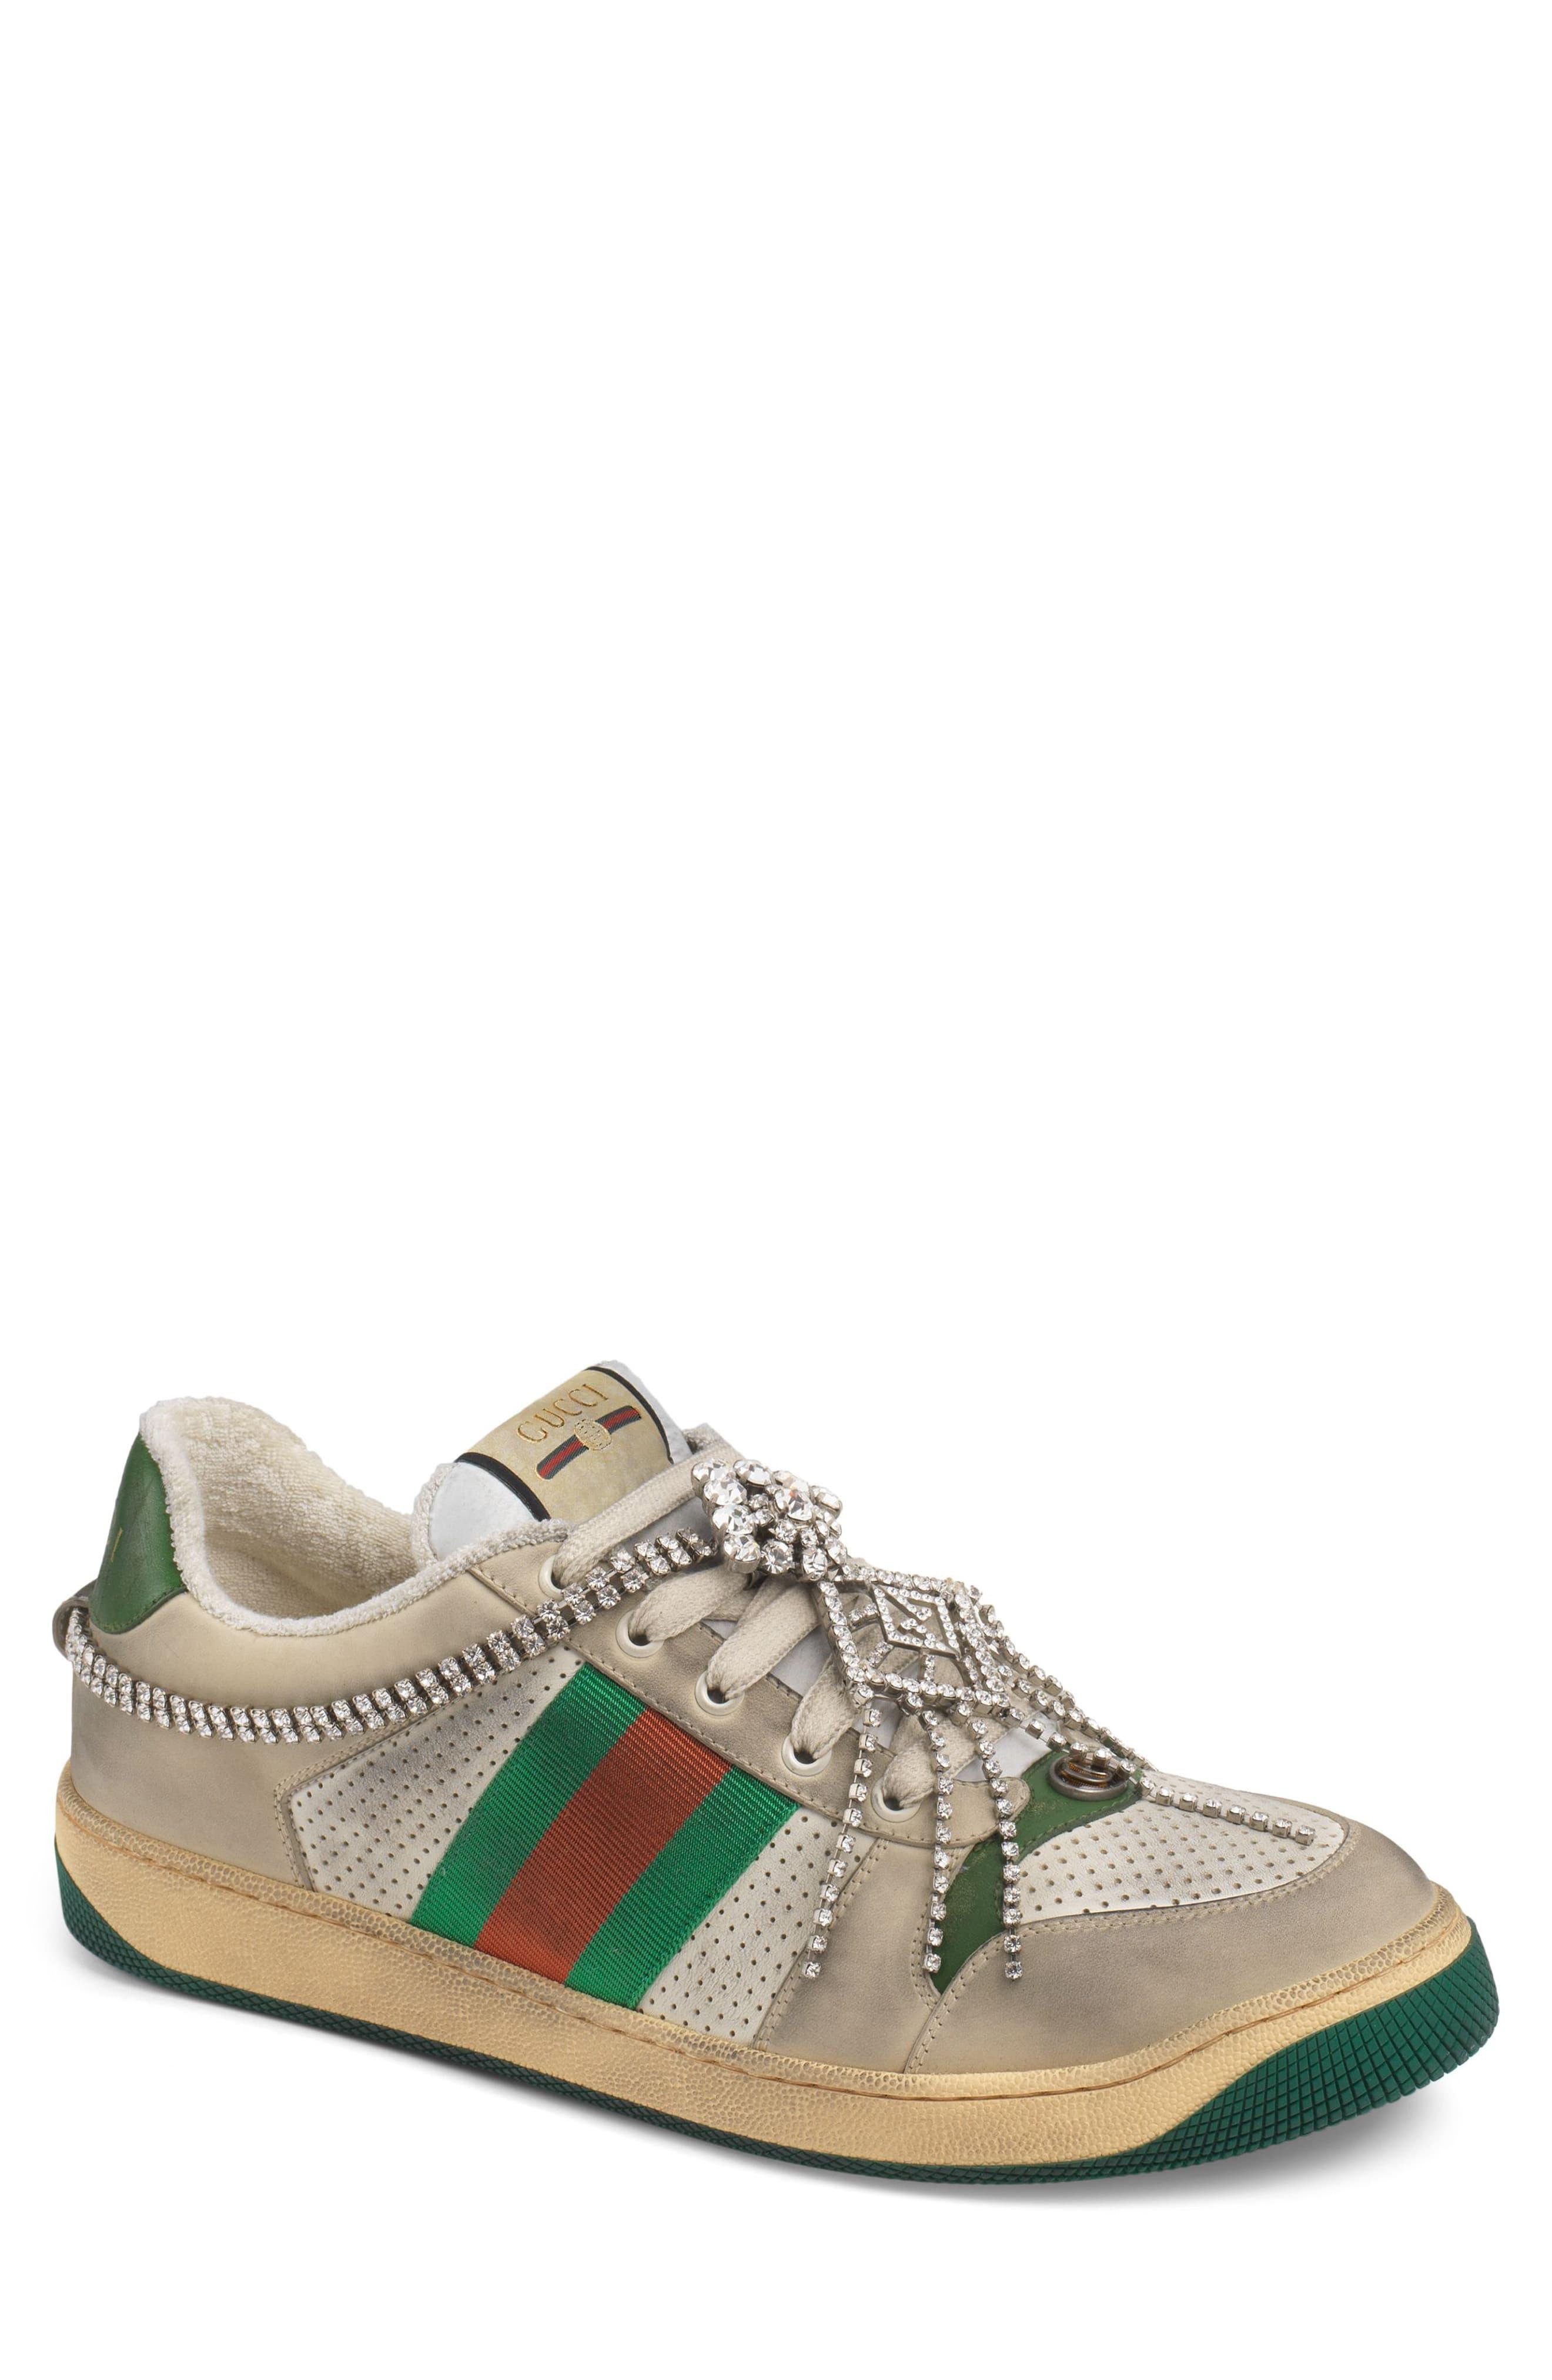 gucci sneaker with jewels